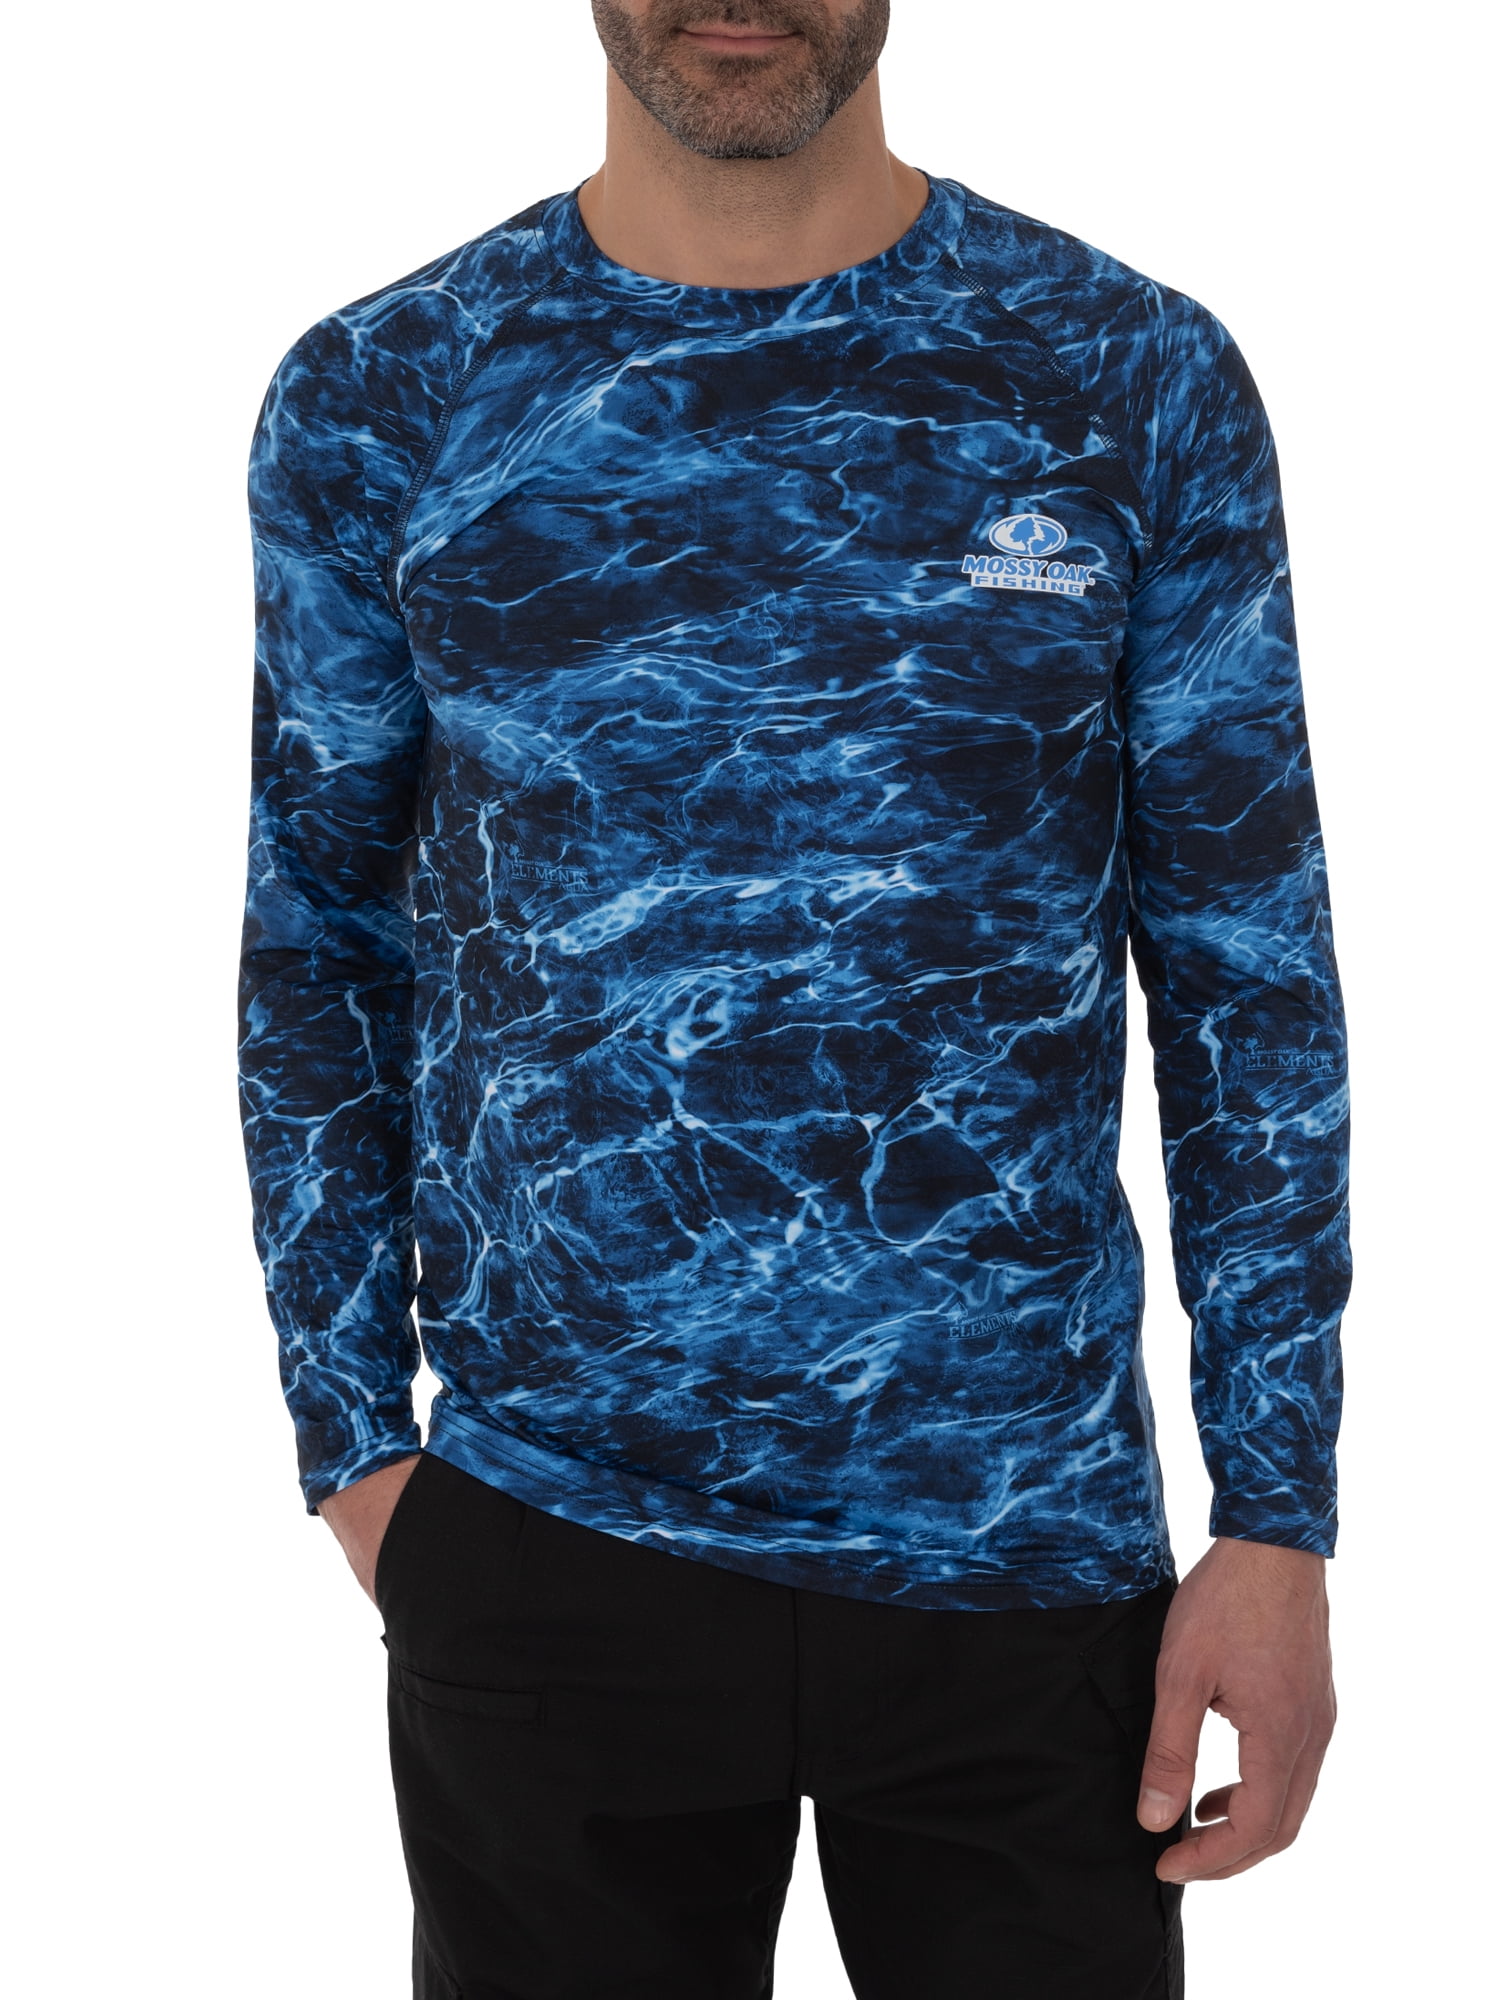 Mossy Oak Long Sleeve Fishing Tee with Insect Repellent - Mossy Oak Marlin,  XL 